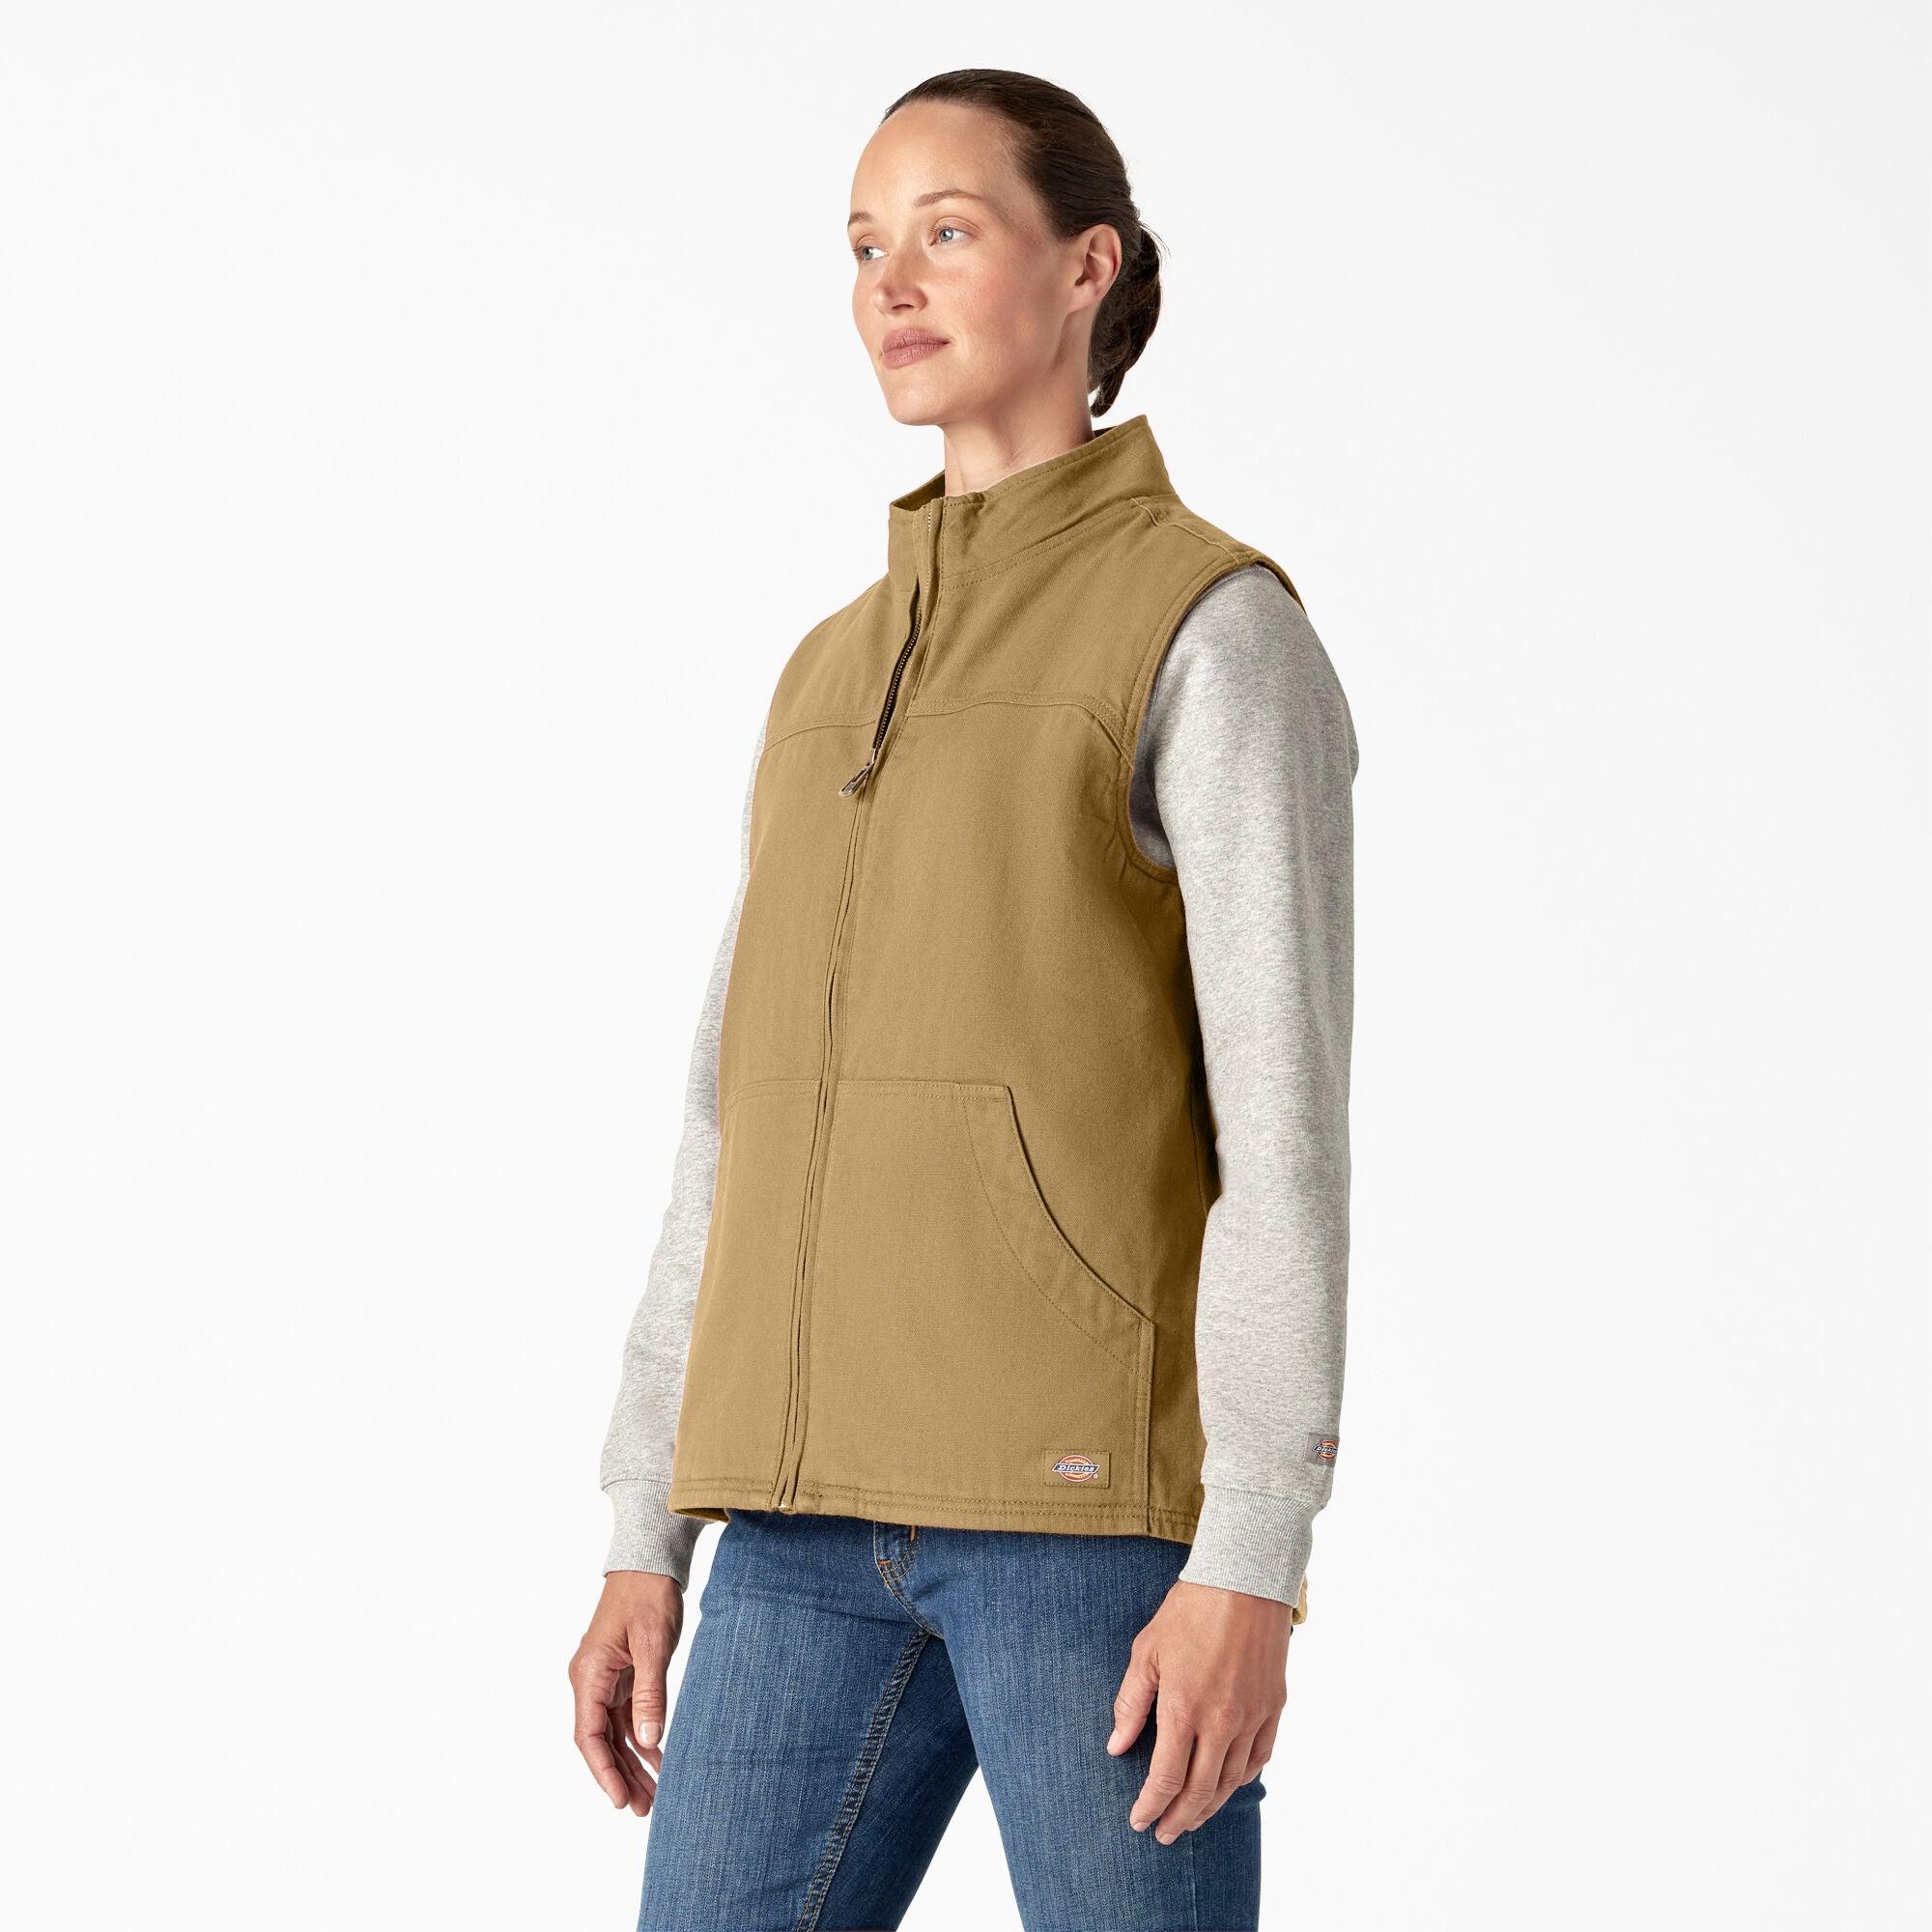 Women's Fleece Lined Duck Canvas Vest - Rinsed Nubuck - Purpose-Built / Home of the Trades